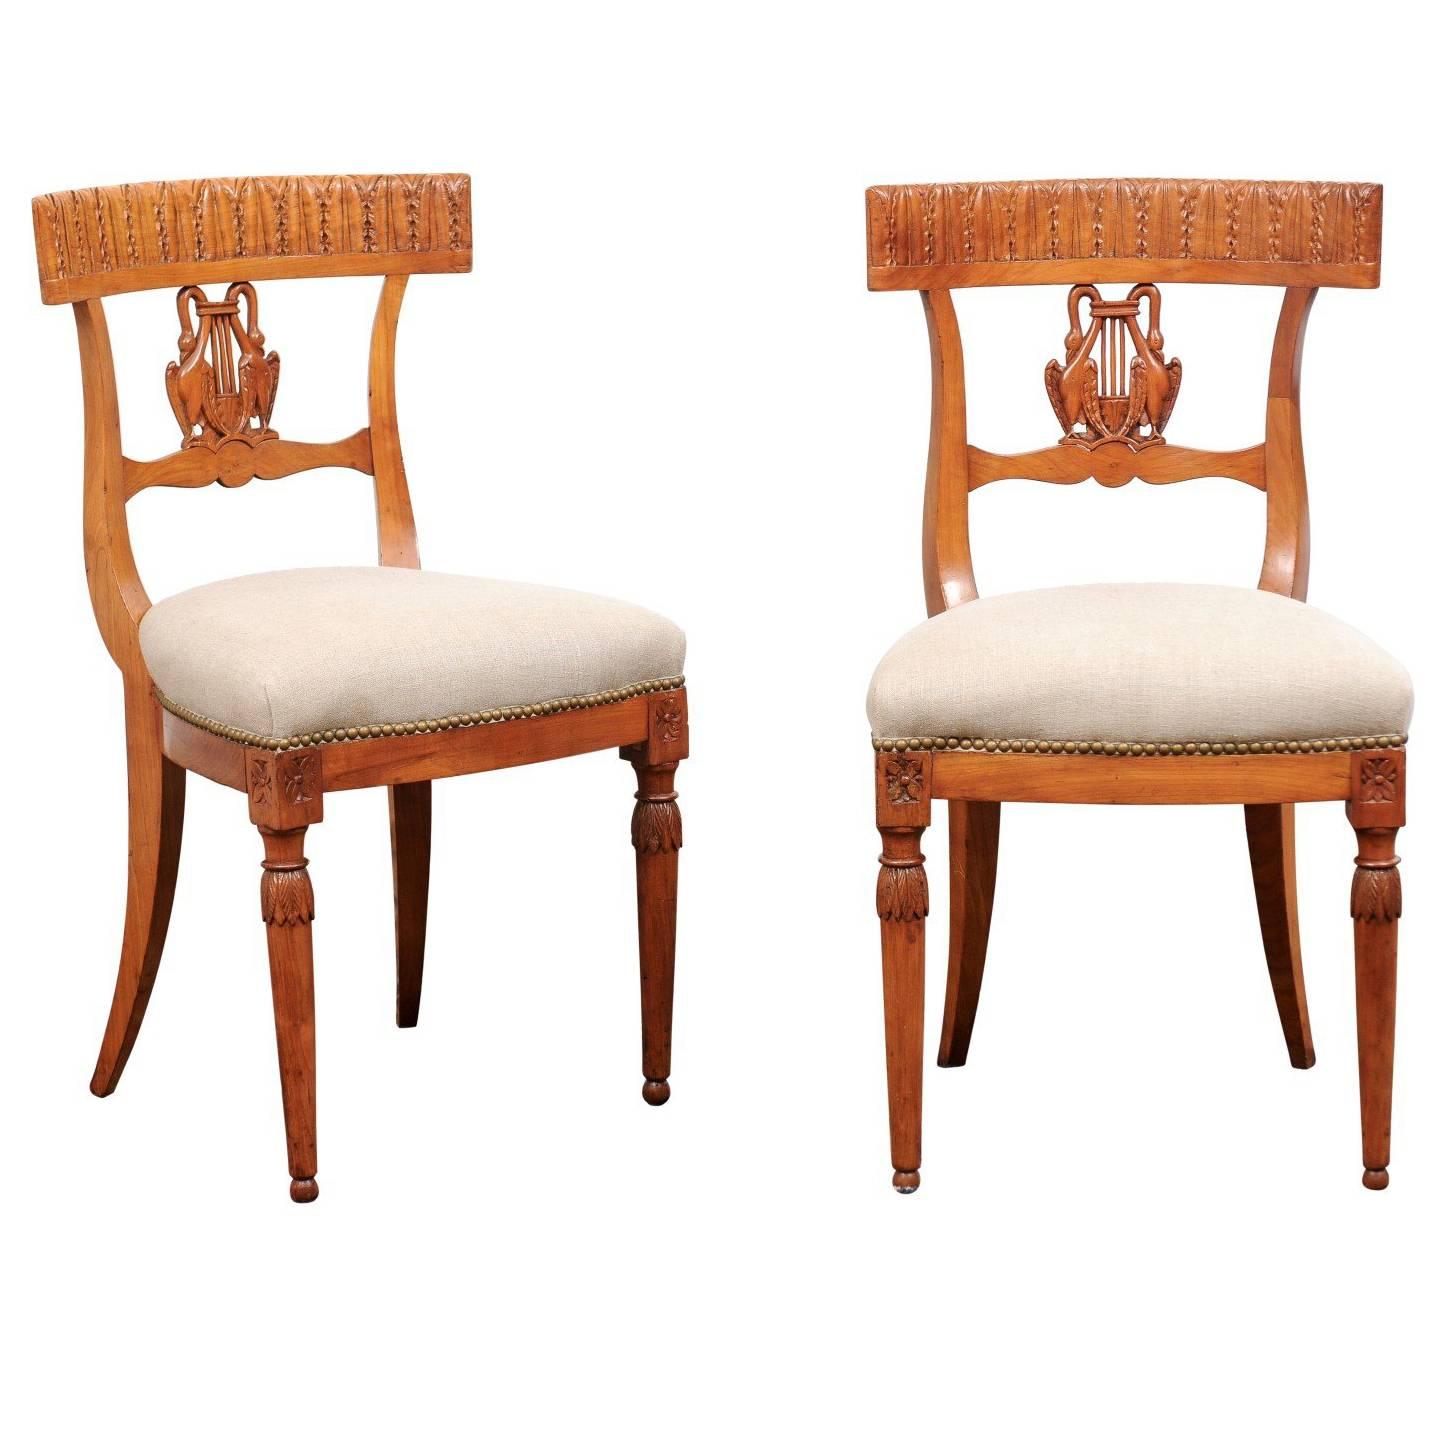 Pair of Italian Neoclassical Side Chairs with Swans and Lyre from the 1850s For Sale